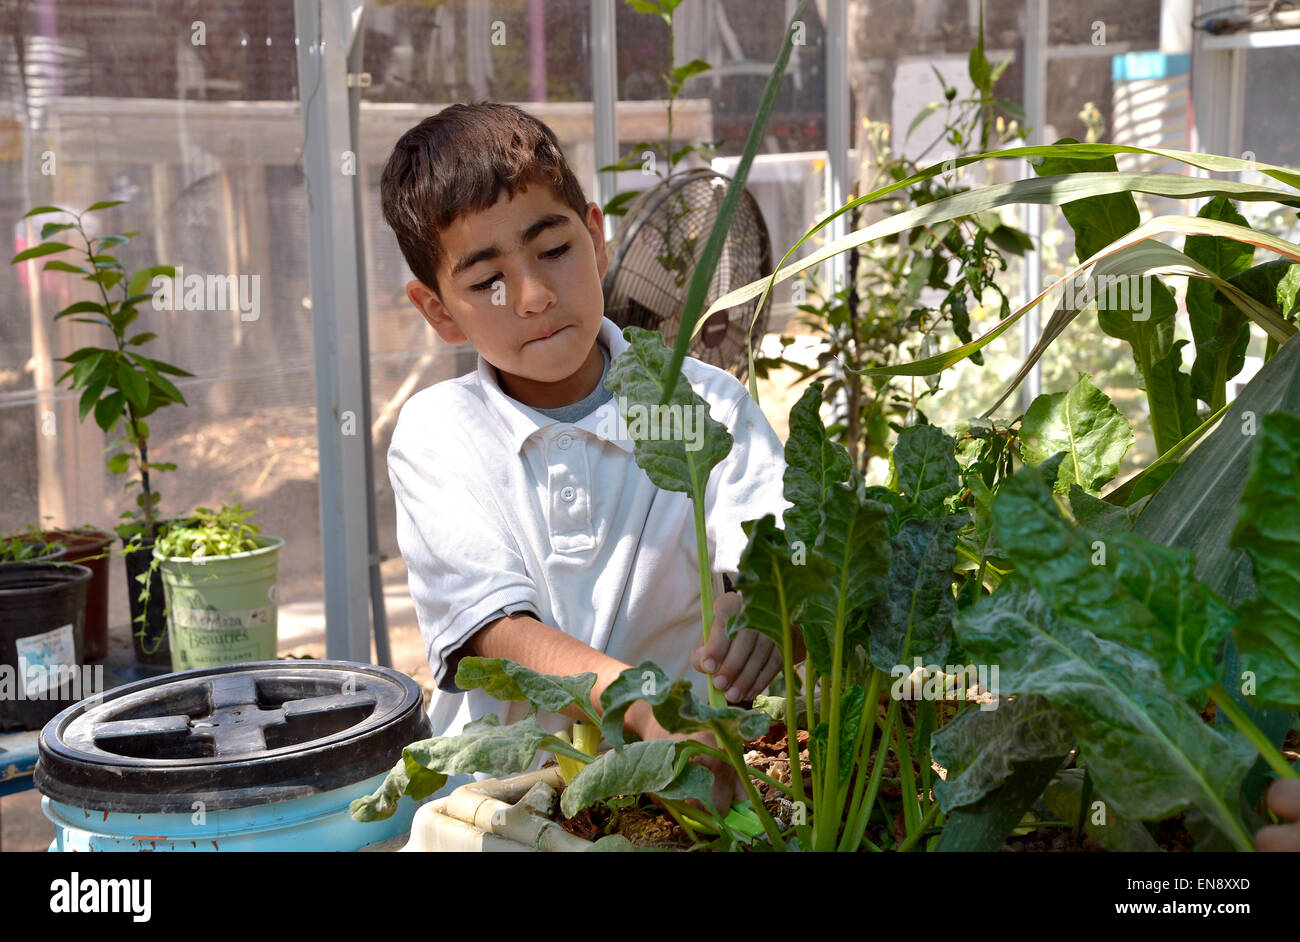 Tucson, Arizona, USA. 29 April, 2015: Michael Perez, 10, harvests greens from the greenhouse at Manzo Elementary School, Tucson, Arizona, USA.  The school was the first in TUSD to be certified for garden to cafeteria food consumption and first in the state of Arizona for rainwater harvesting and composting.  Garden projects in the district work with internationally known Biosphere2 and the University of Arizona. The garden was built in conjunction with the National Park Foundation's First Bloom program. Credit:  Norma Jean Gargasz/Alamy Live News Stock Photo